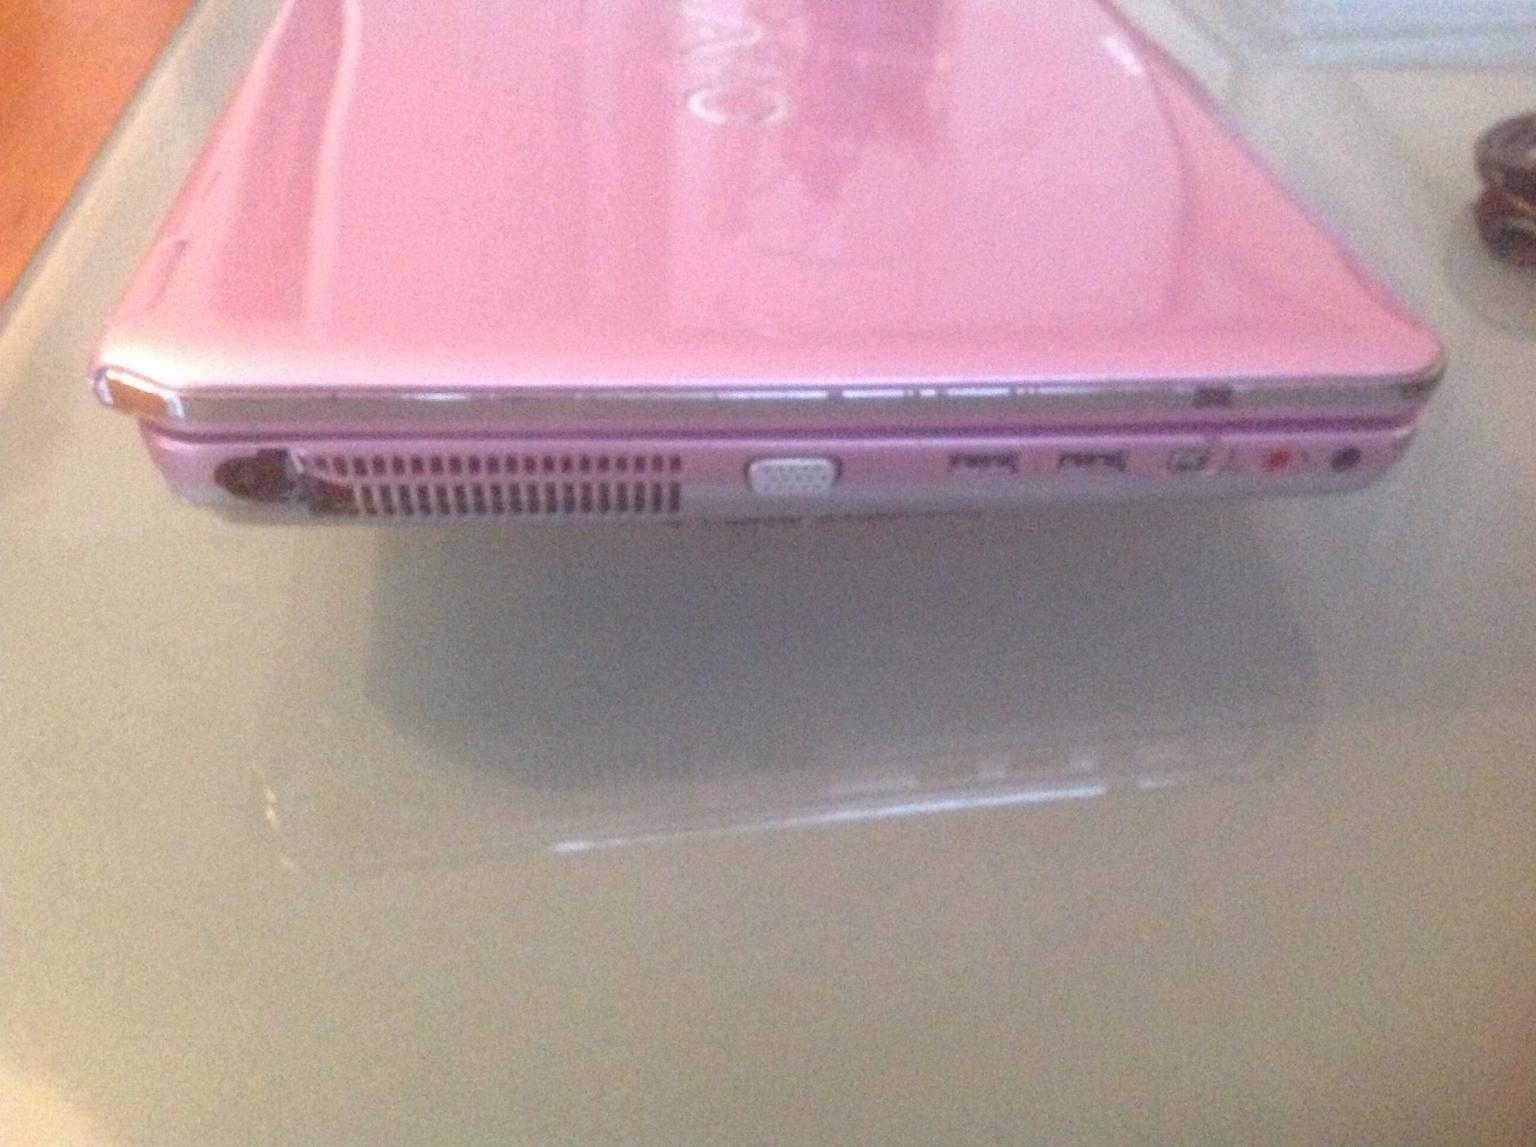 Pink Vaio Laptop Sony Pcg 3e7p In Sw19 Merton For 35 00 For Sale Shpock